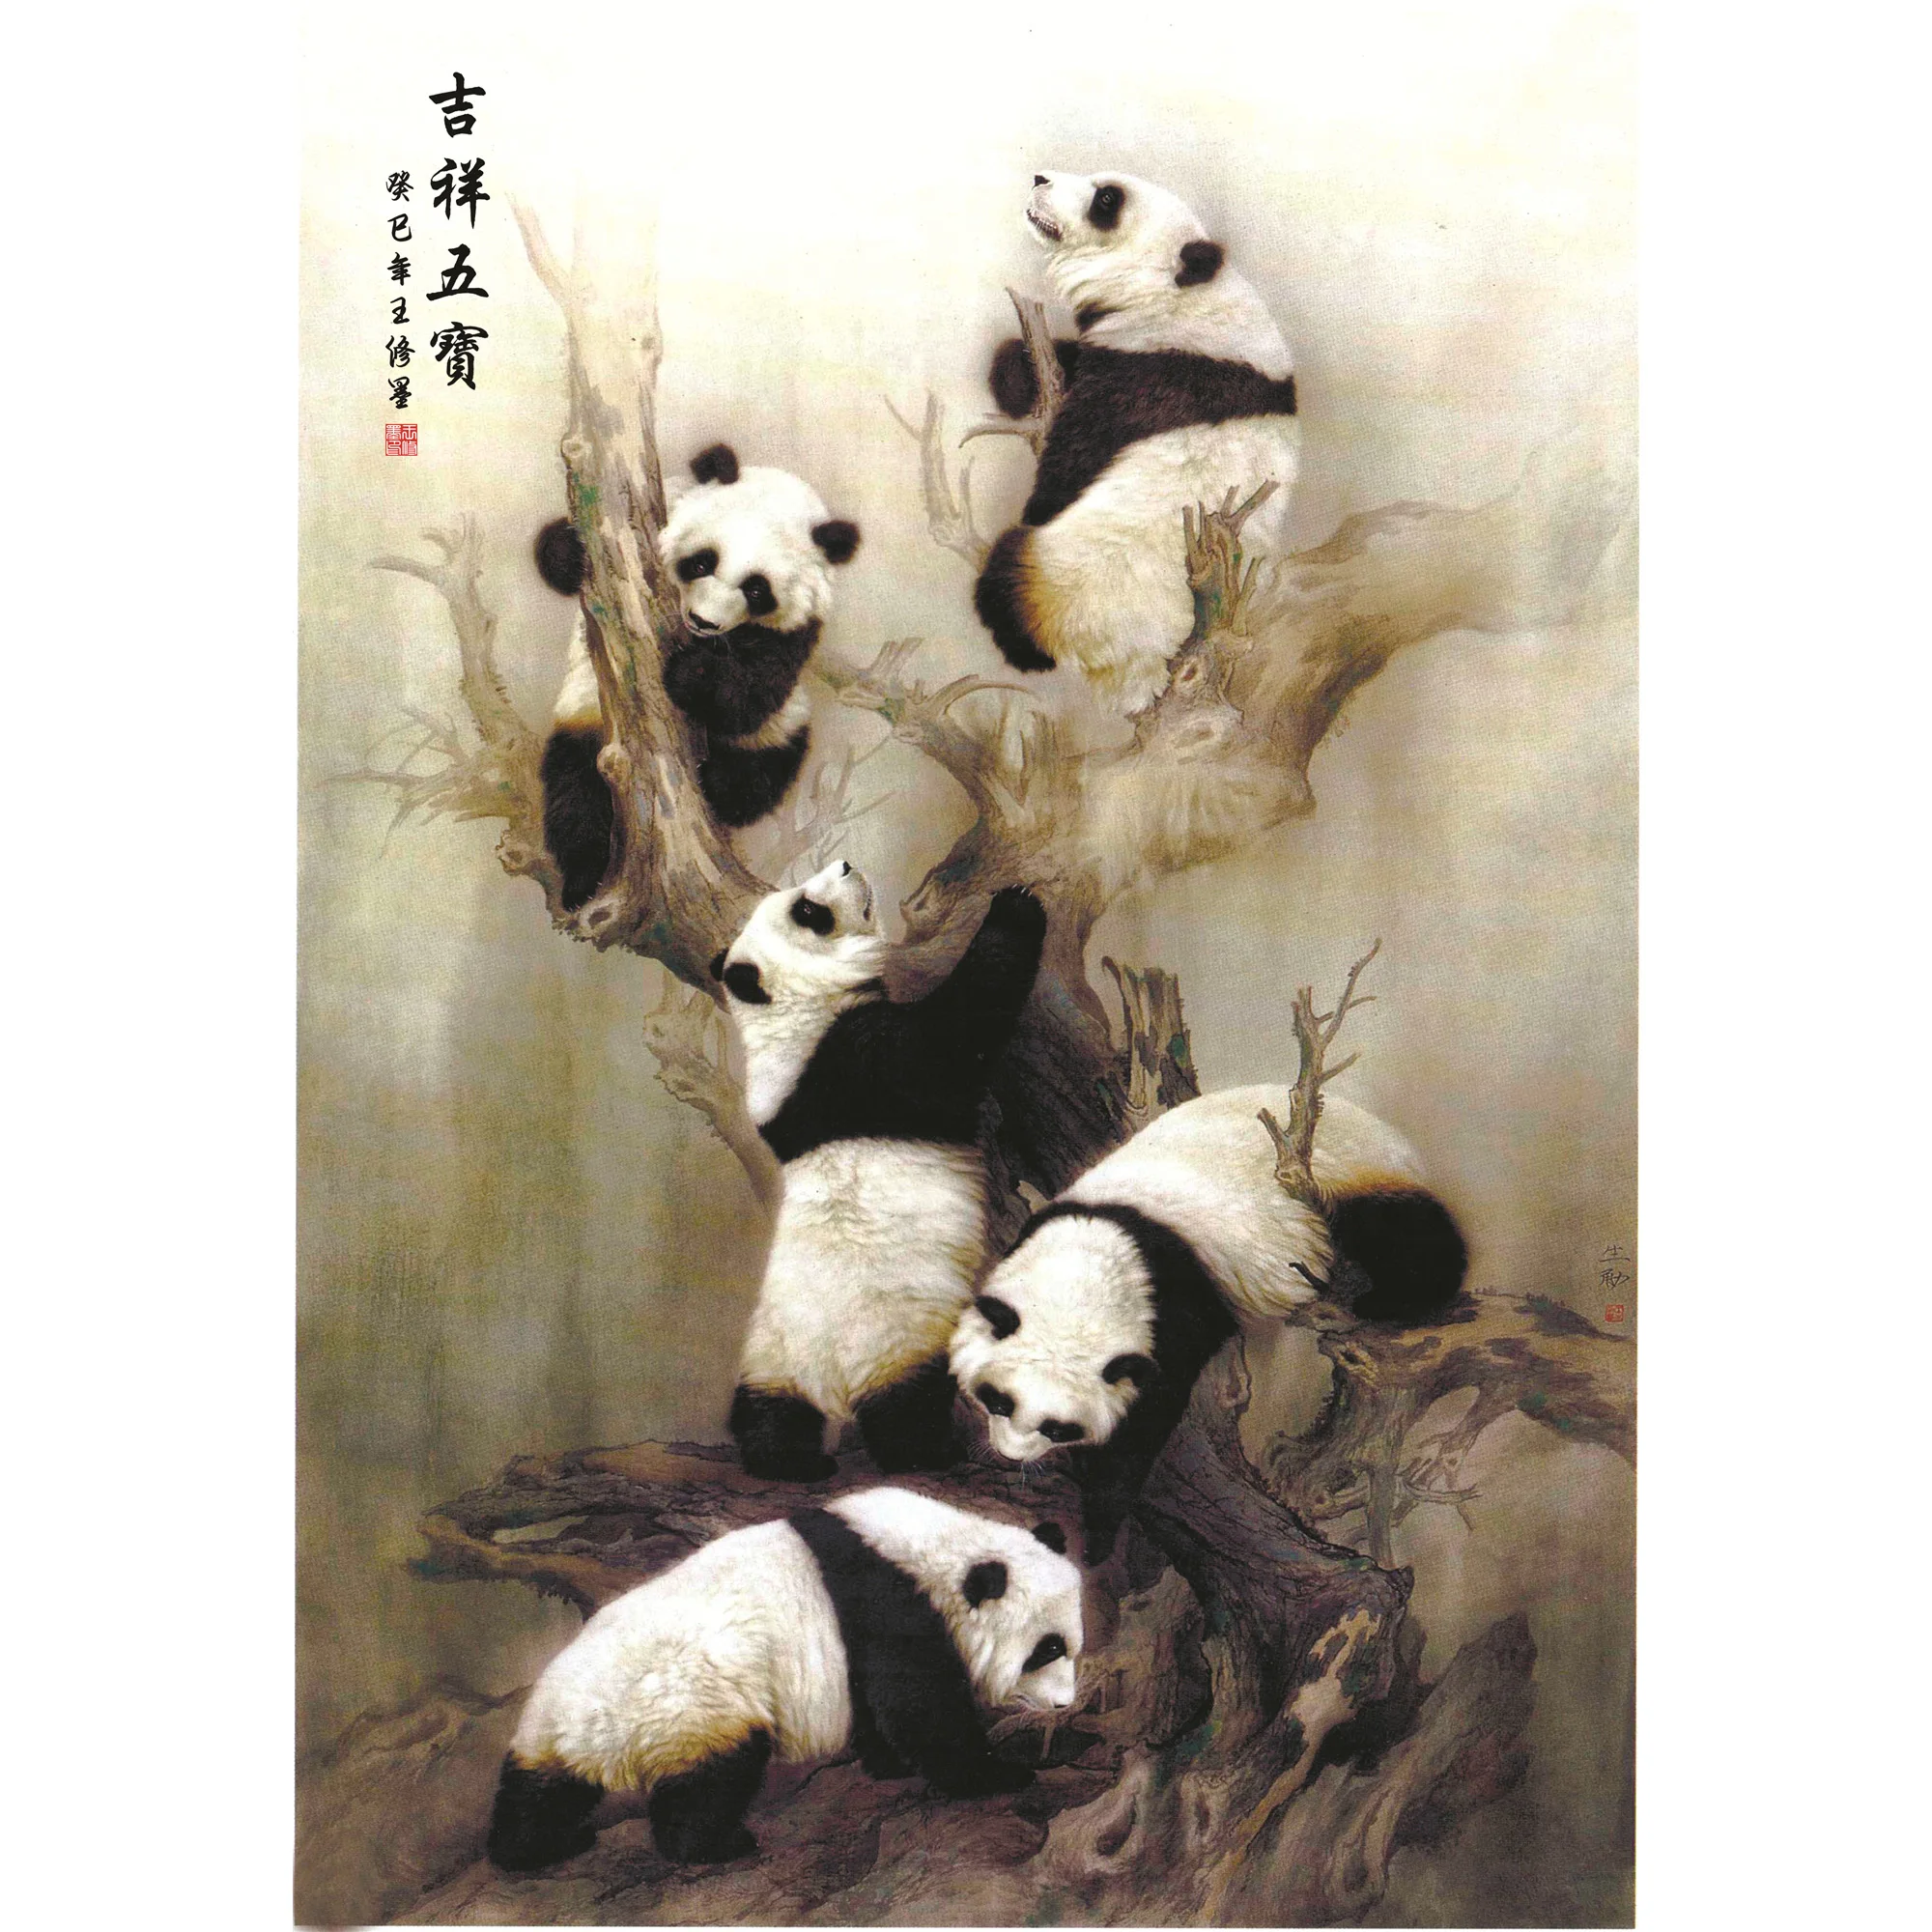 

Chinese Feng Shui Silk Hanging Painting,Home/Office Decoration Calligraphy Artwork Wall Scroll - Five Pandas